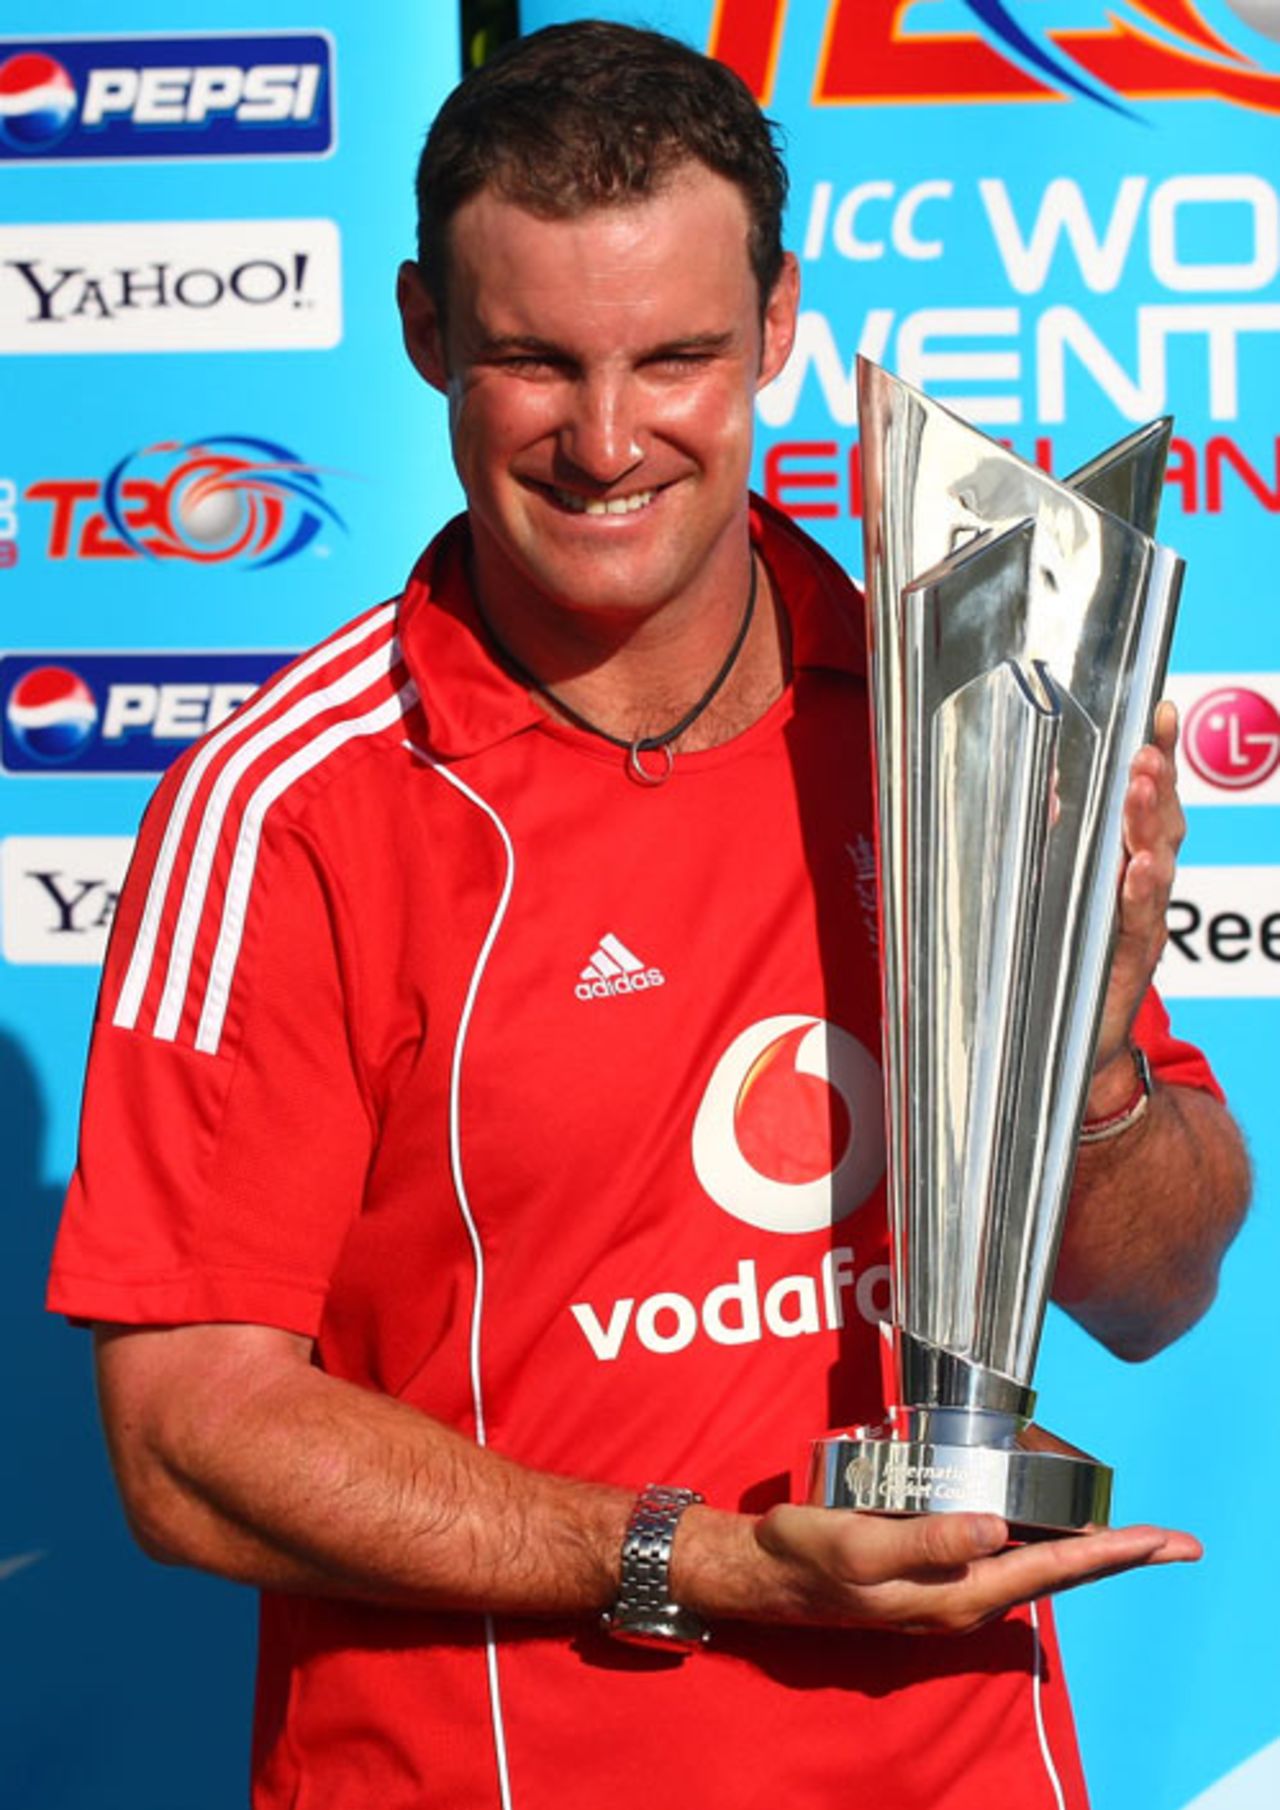 Andrew Strauss with the ICC World Twenty20 trophy 24 hours before England's match against West Indies, Trinidad, March 14, 2009